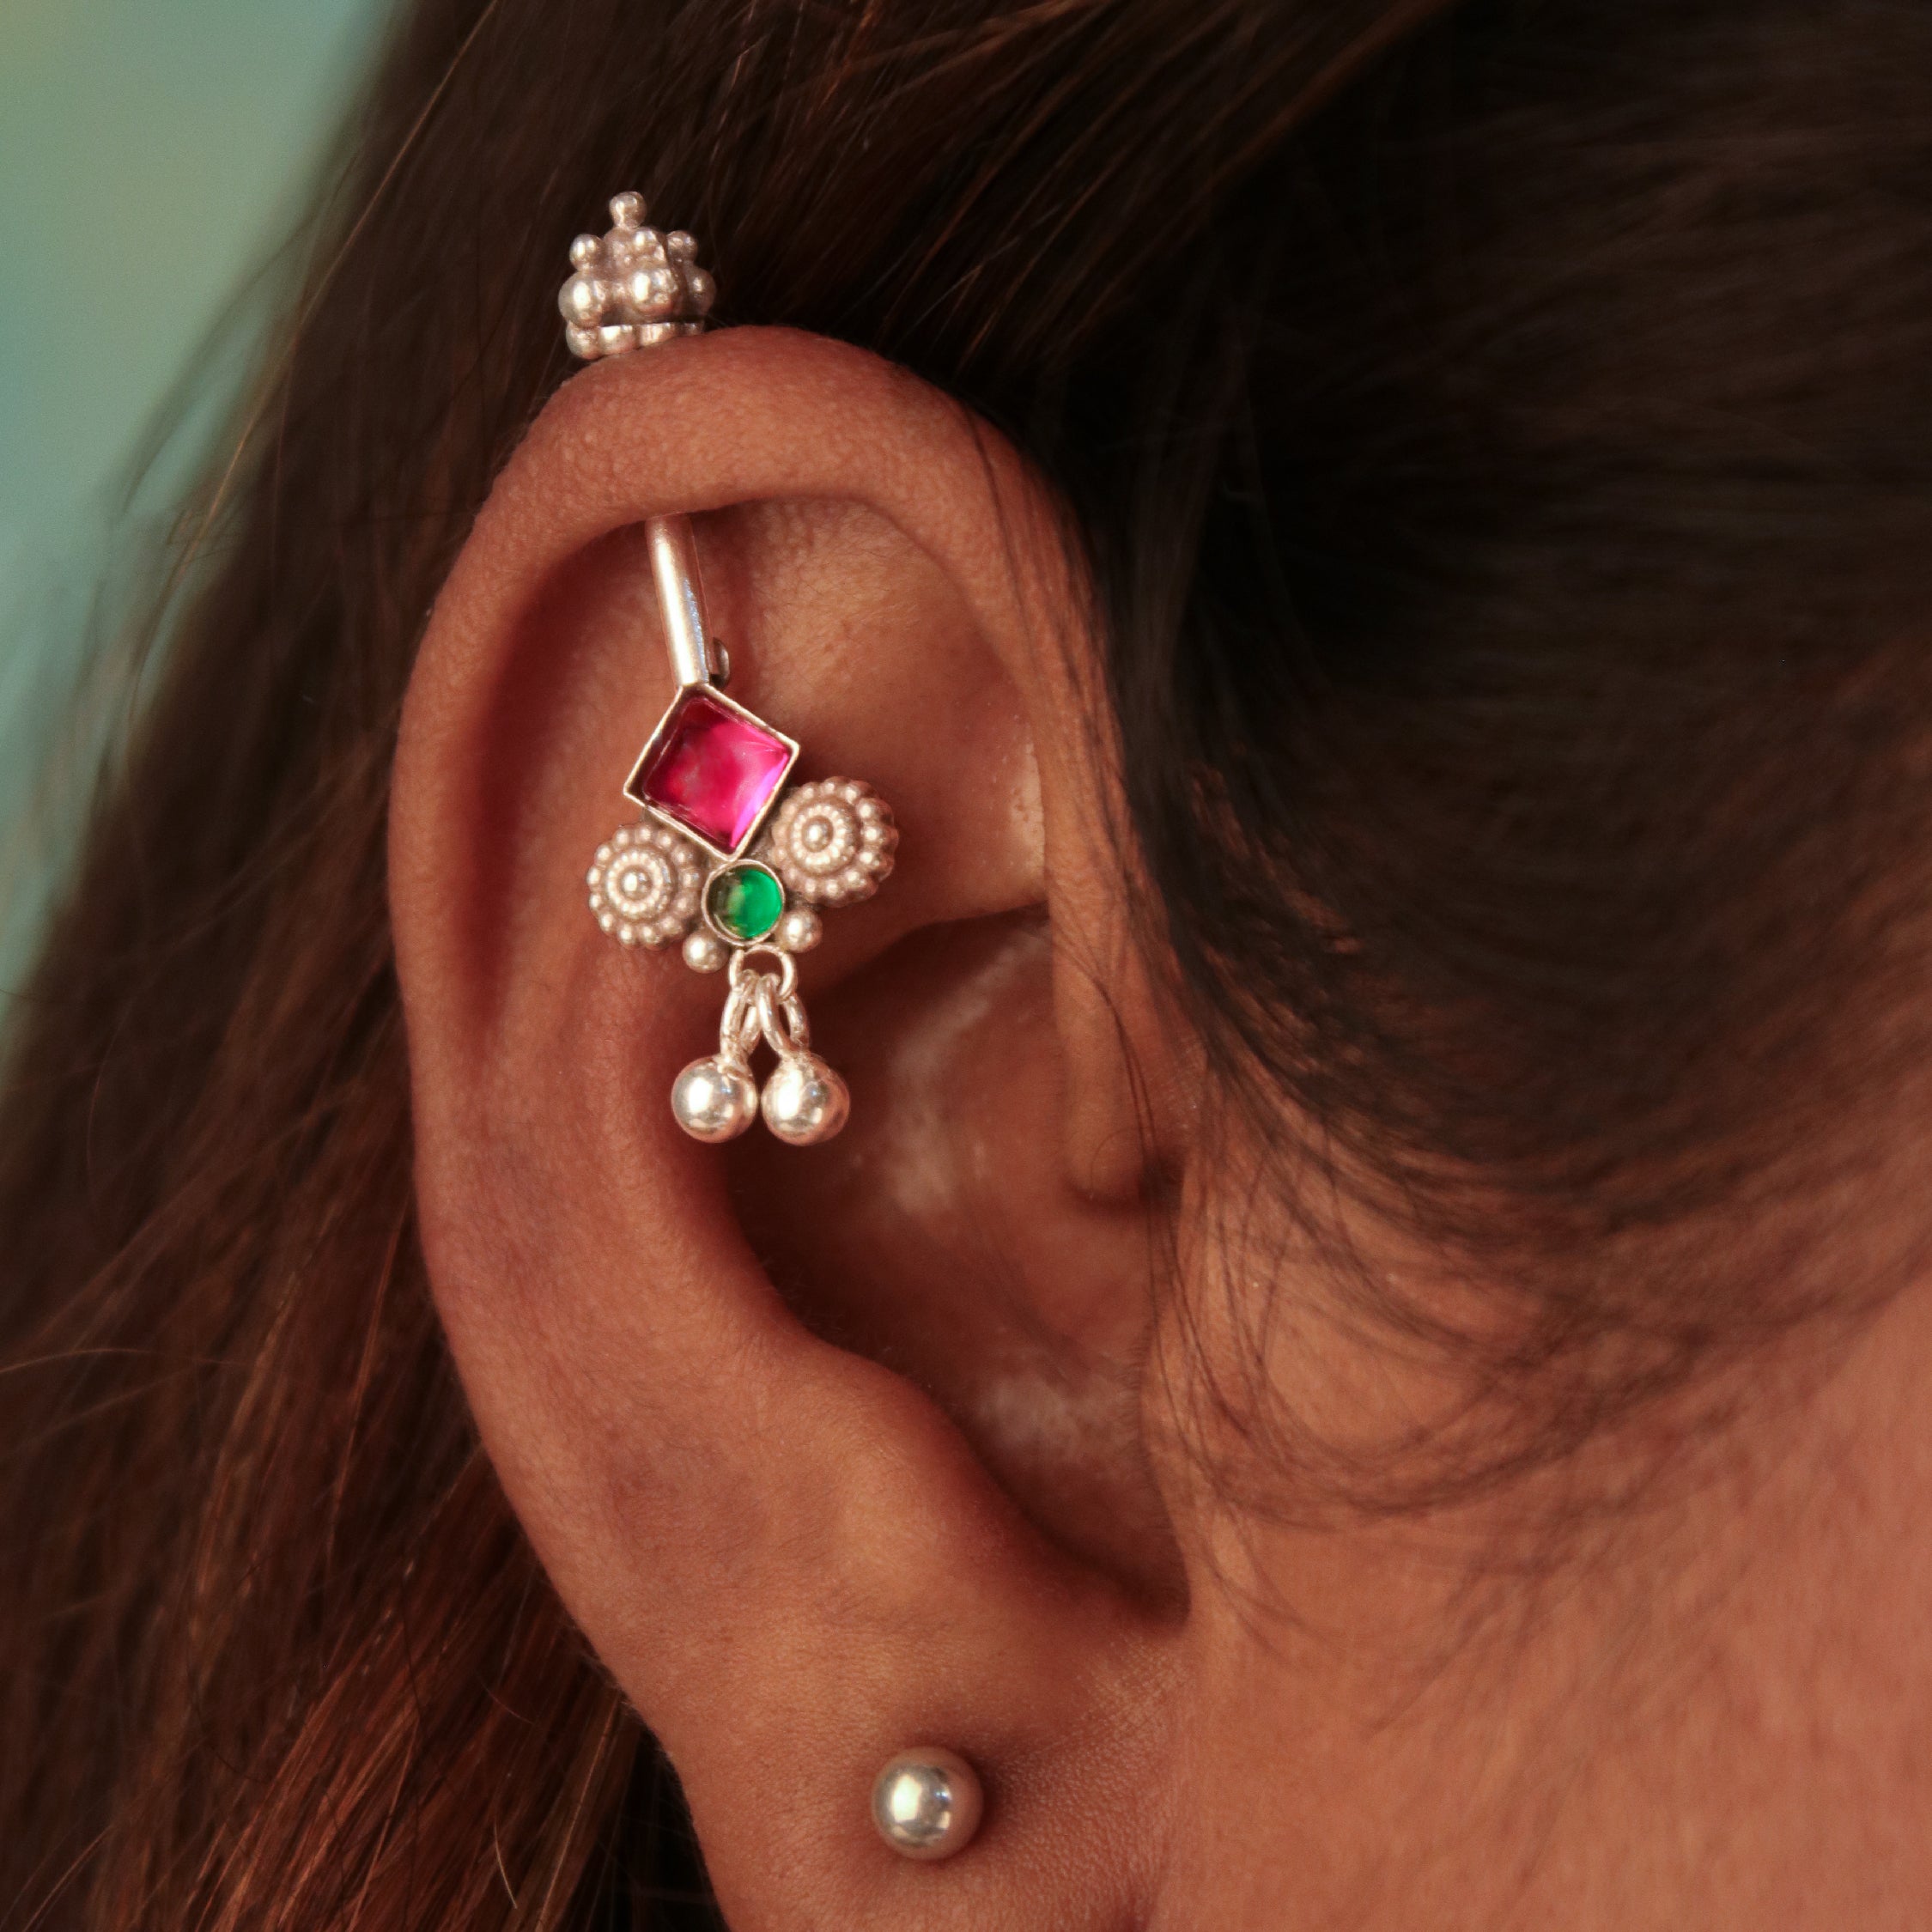 Bhumi silver bugadi pierced (Pink, Green) by Moha